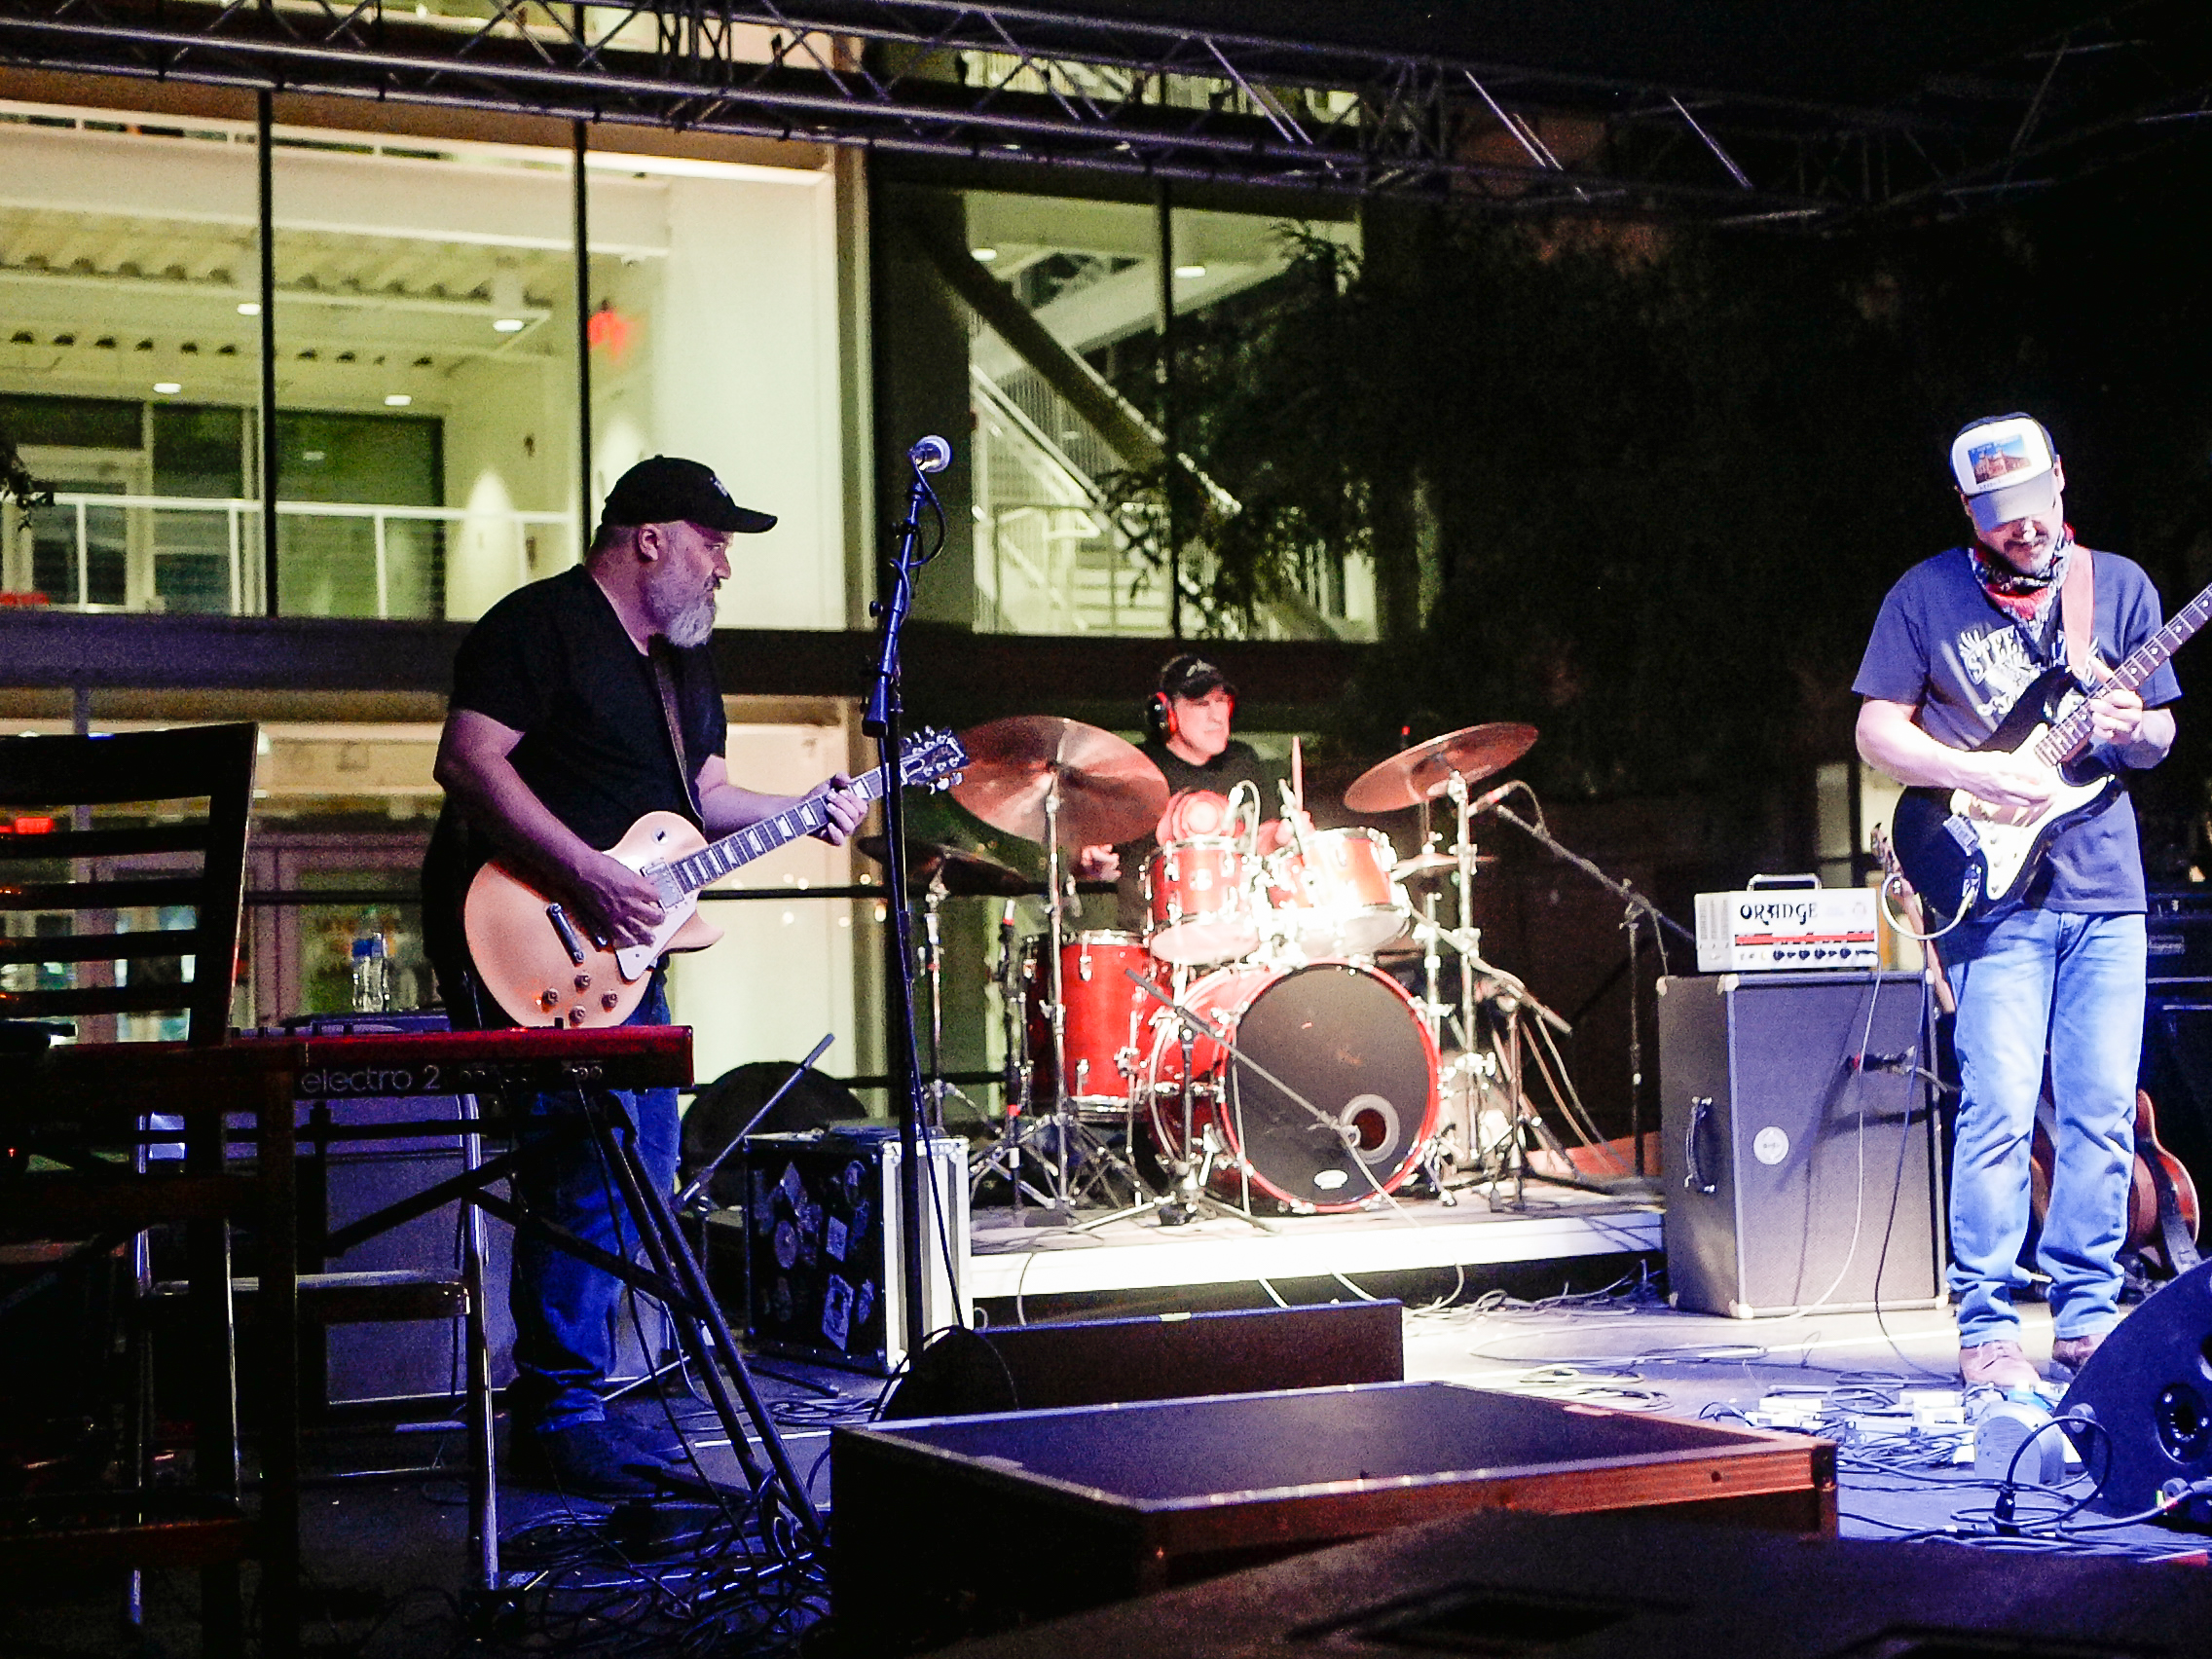 Backyard Tire Fire perform at the River Music Experience courtyard during Alternating Currents.